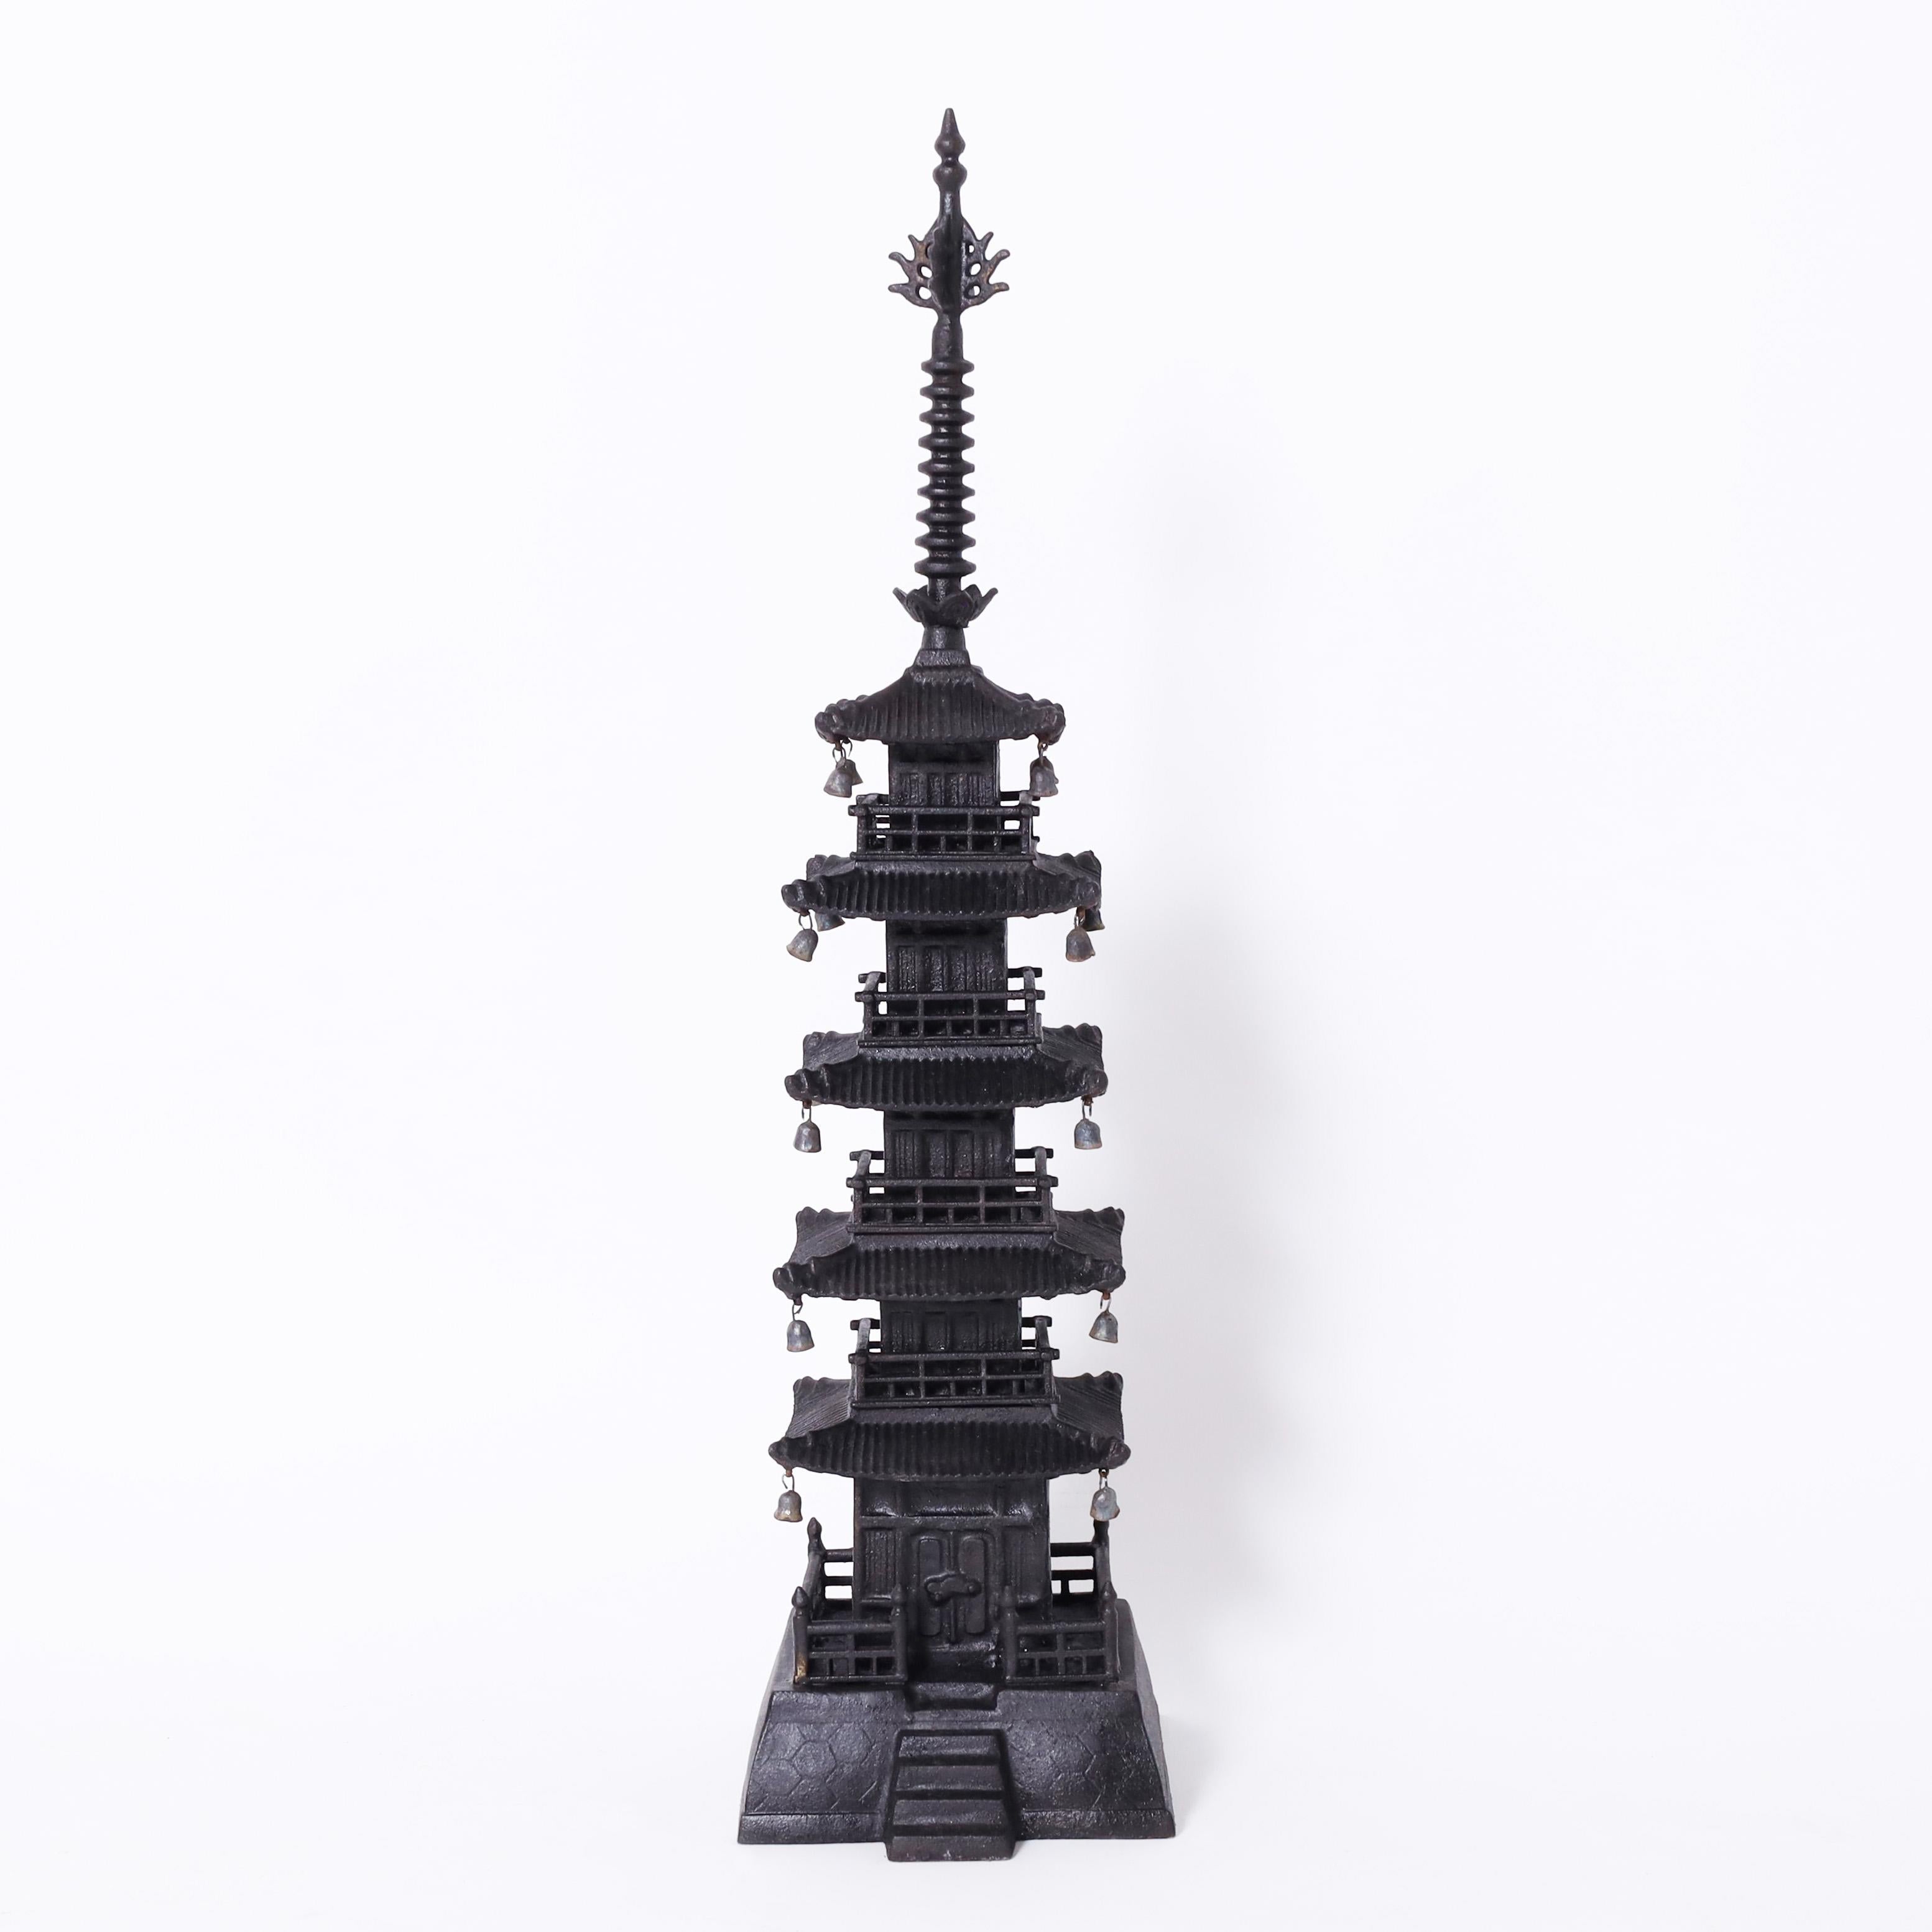 Enchanting pair of Japanese pagodas crafted in iron with classic finials or sorin at the tops on five floors with hanging bells and an entrance at the bottom.